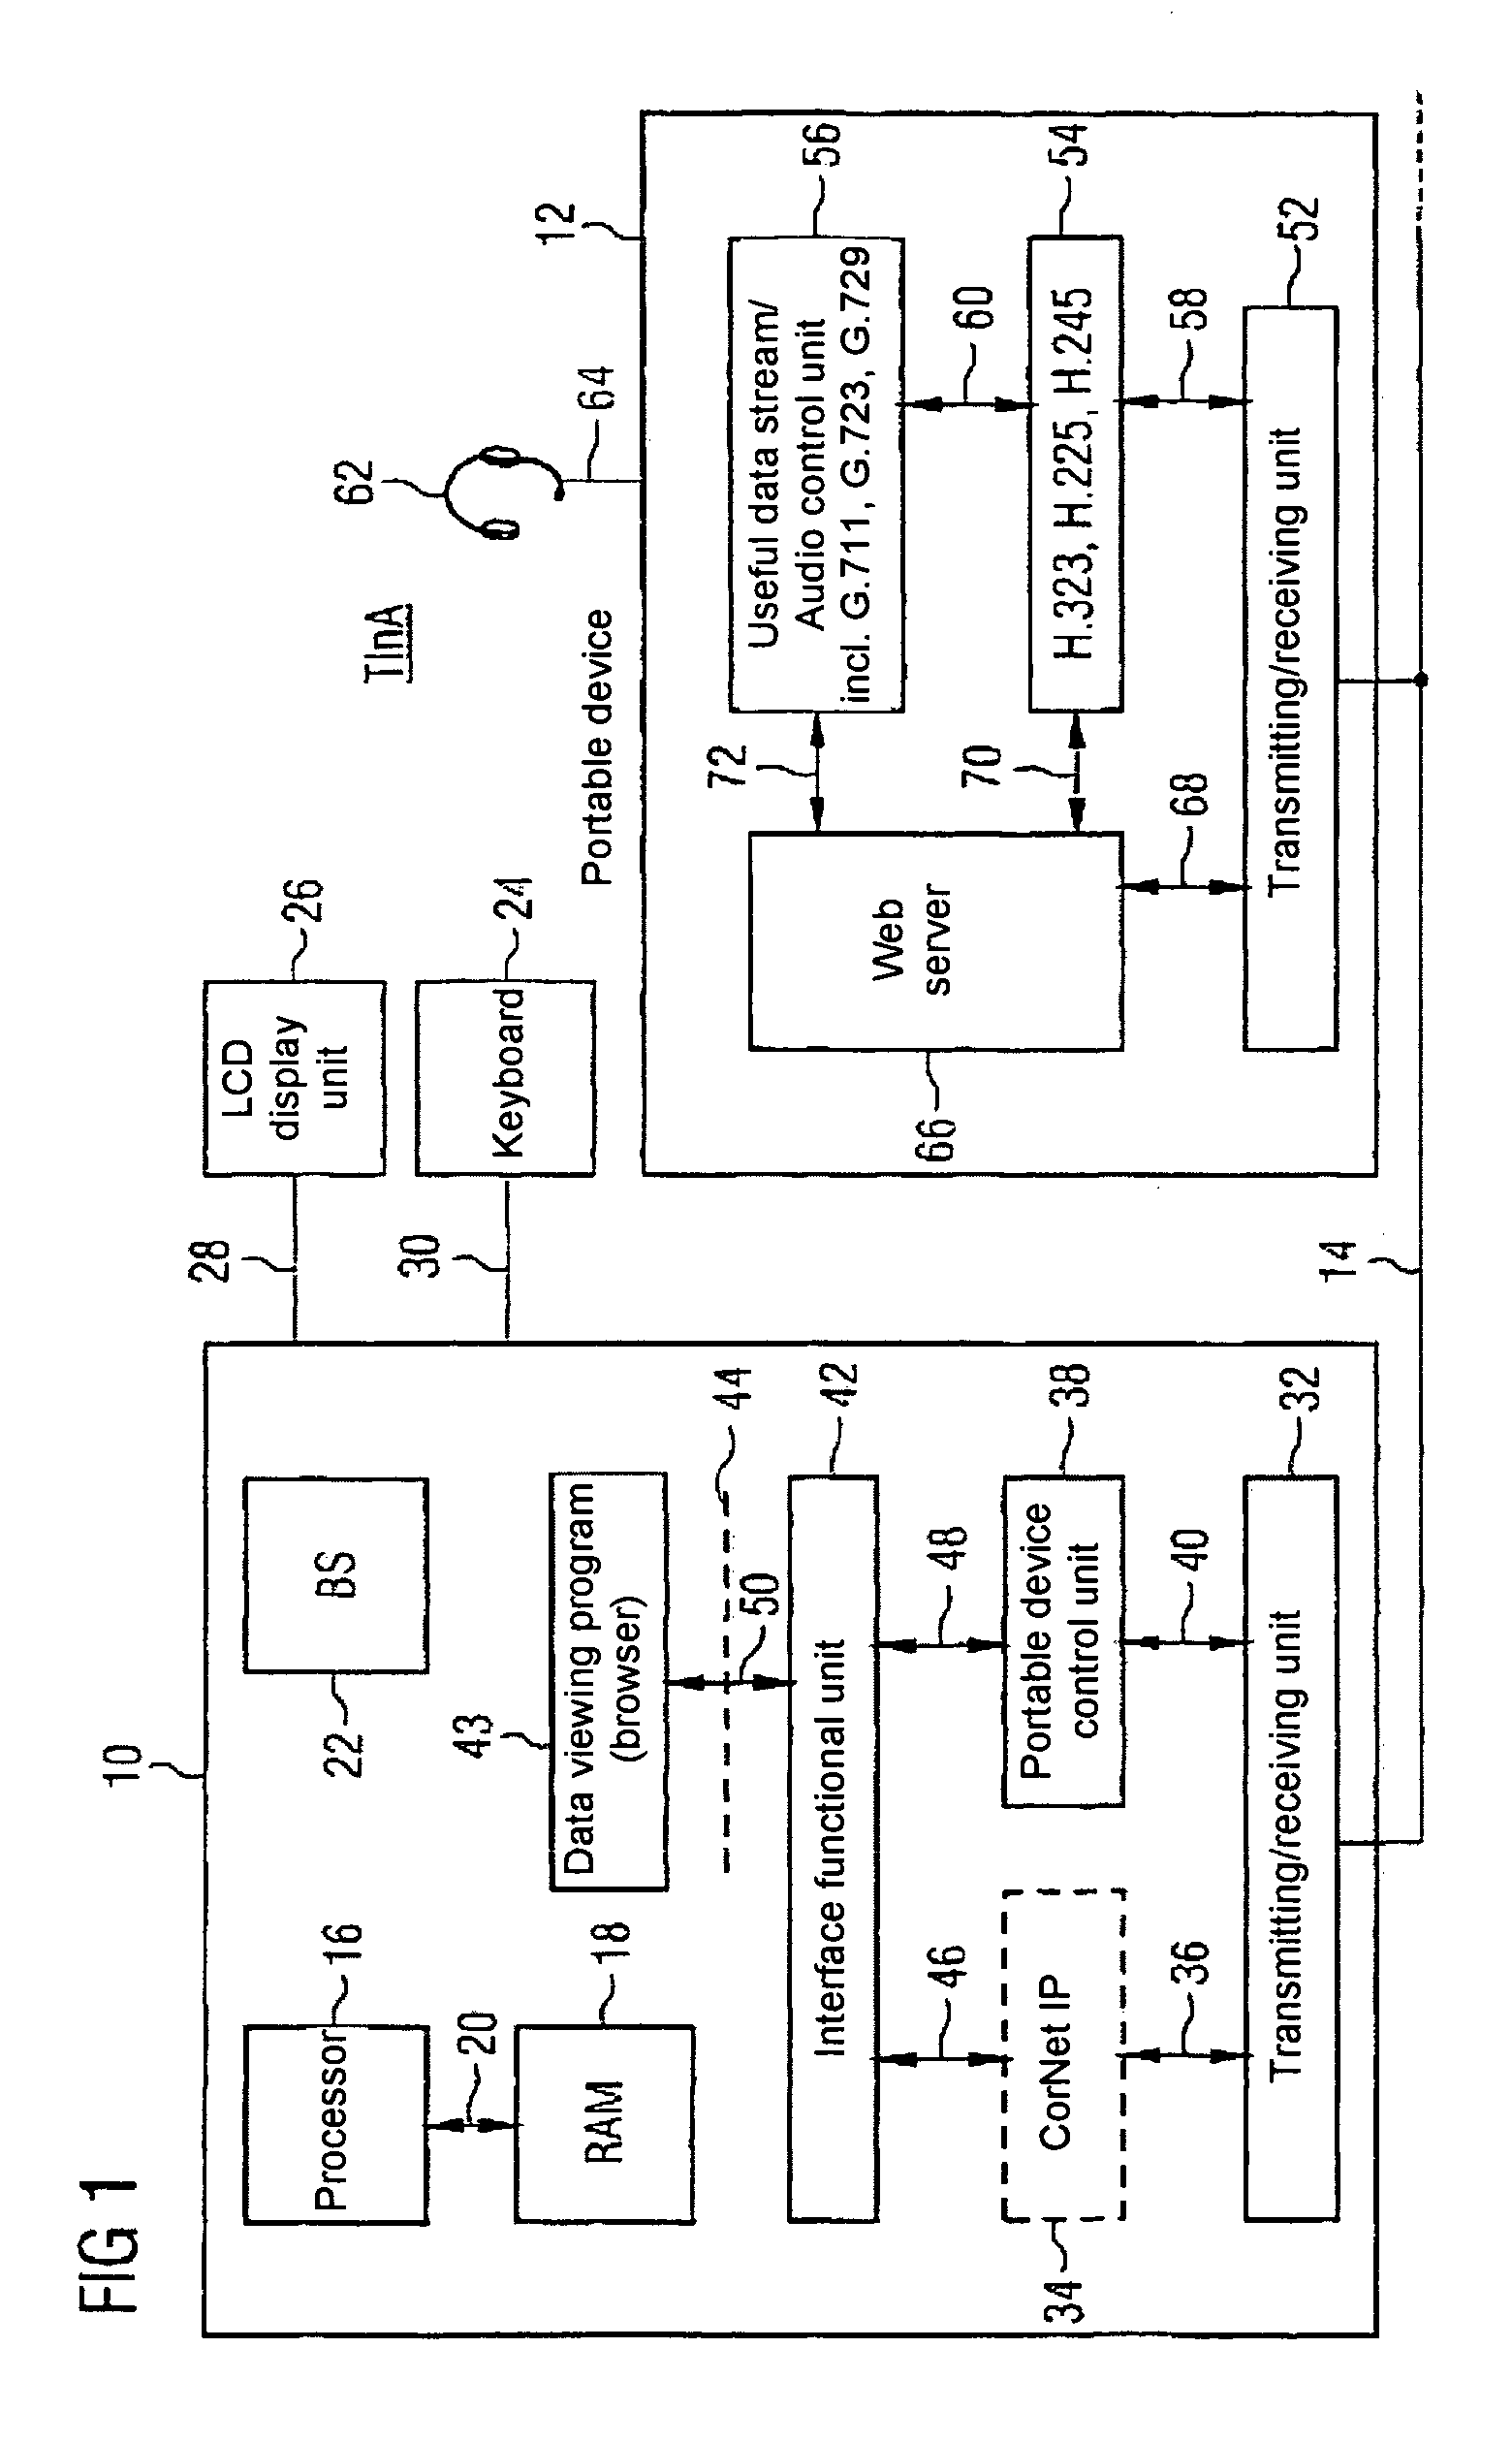 Subscriber-side unit arrangement for data transfer services and associated components